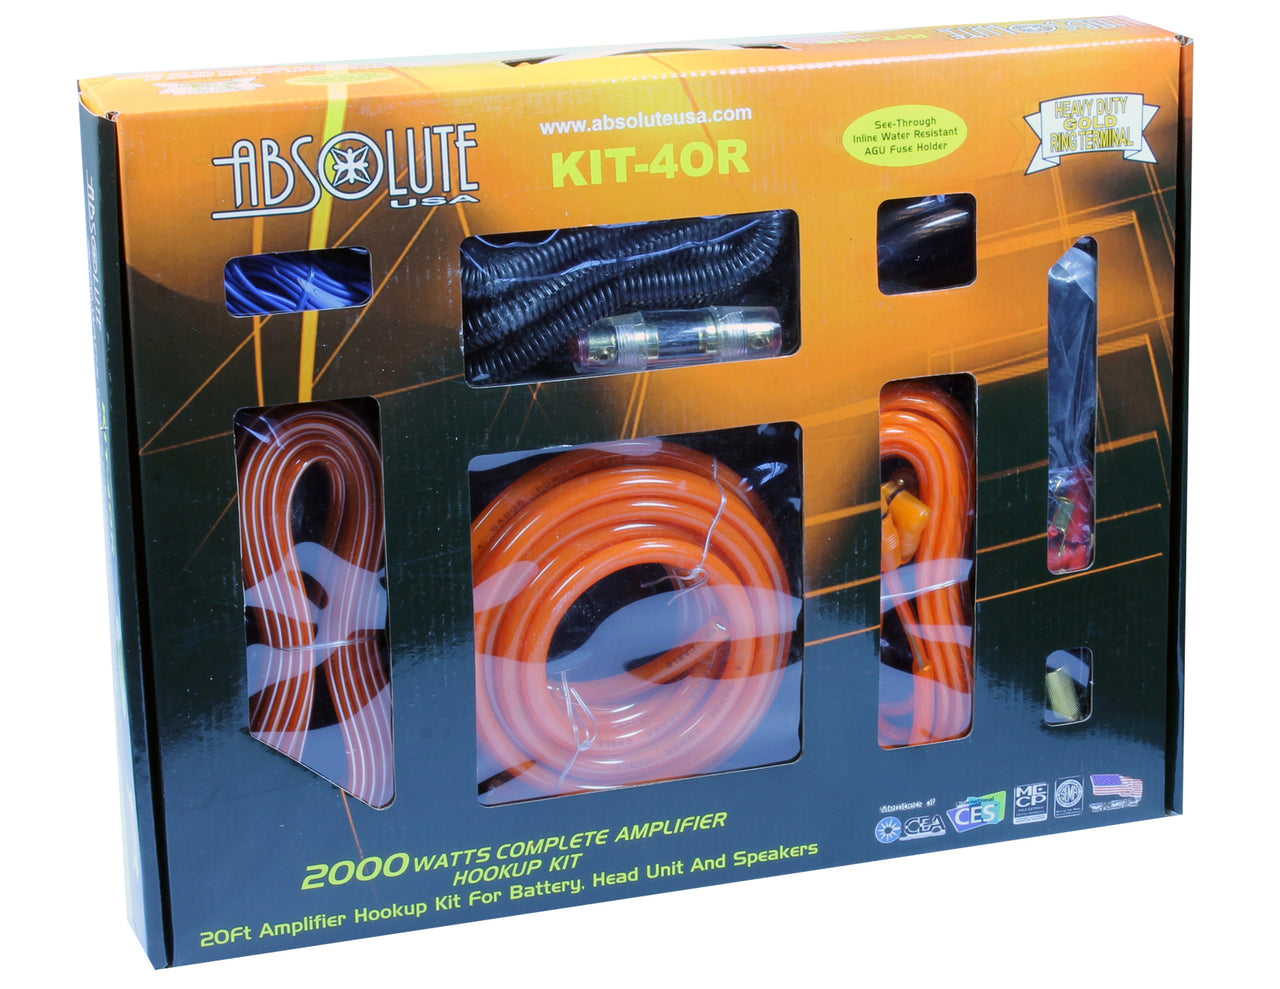 Absolute KIT4OR AMP KIT<br/>Complete PRO Marine Auto Car RV 4 Gauge 2000 Watts Amplifier Complete Installation Amp Kit Power Wiring with Orange Accent Color Scheme